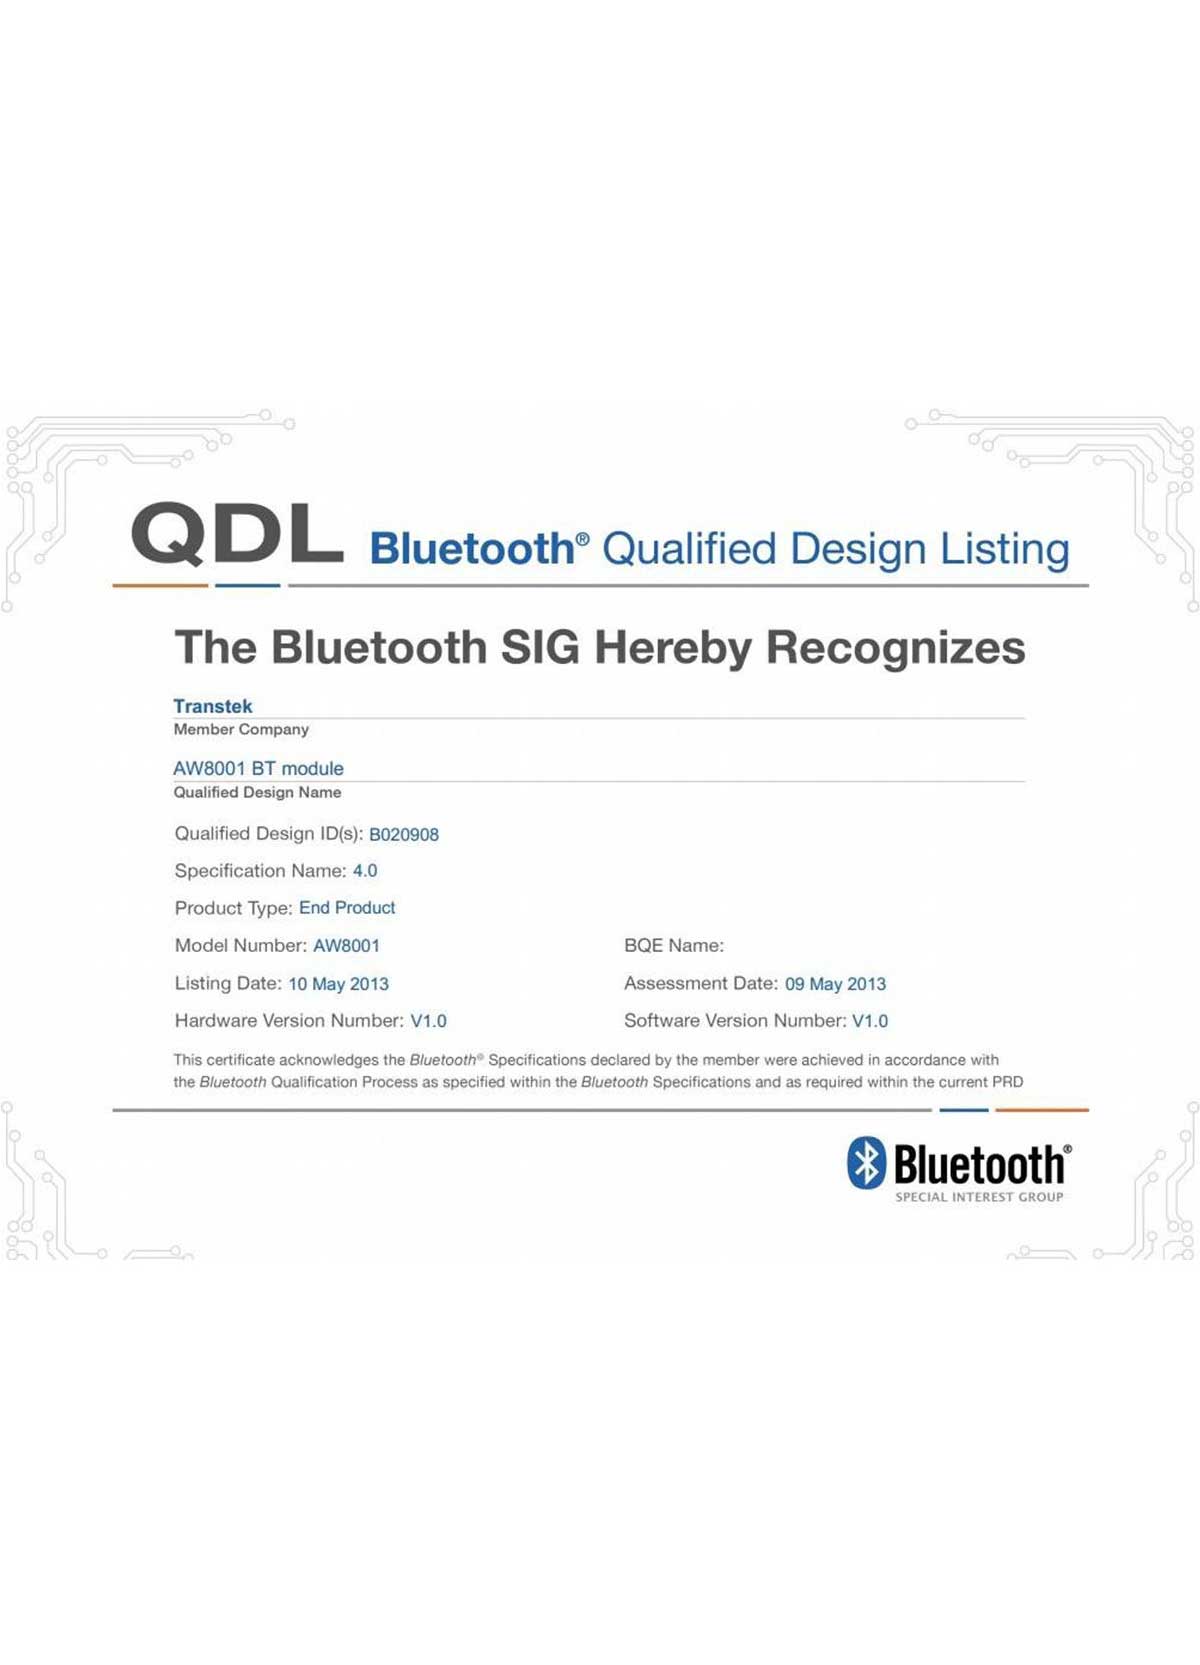 Bluetooth Certificate - AW8001